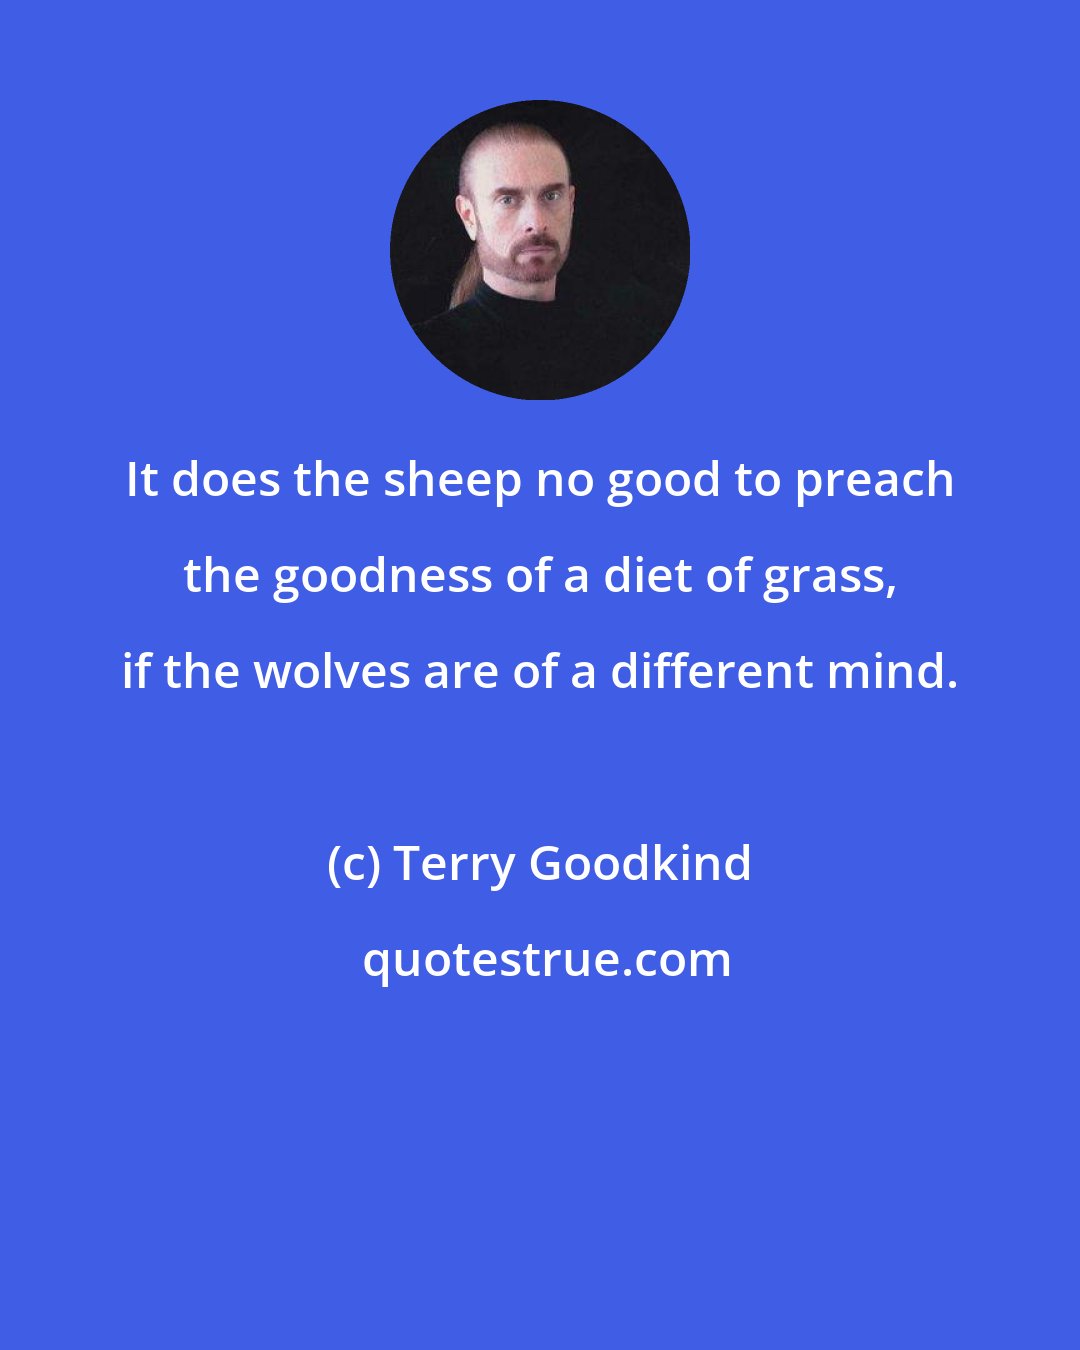 Terry Goodkind: It does the sheep no good to preach the goodness of a diet of grass, if the wolves are of a different mind.